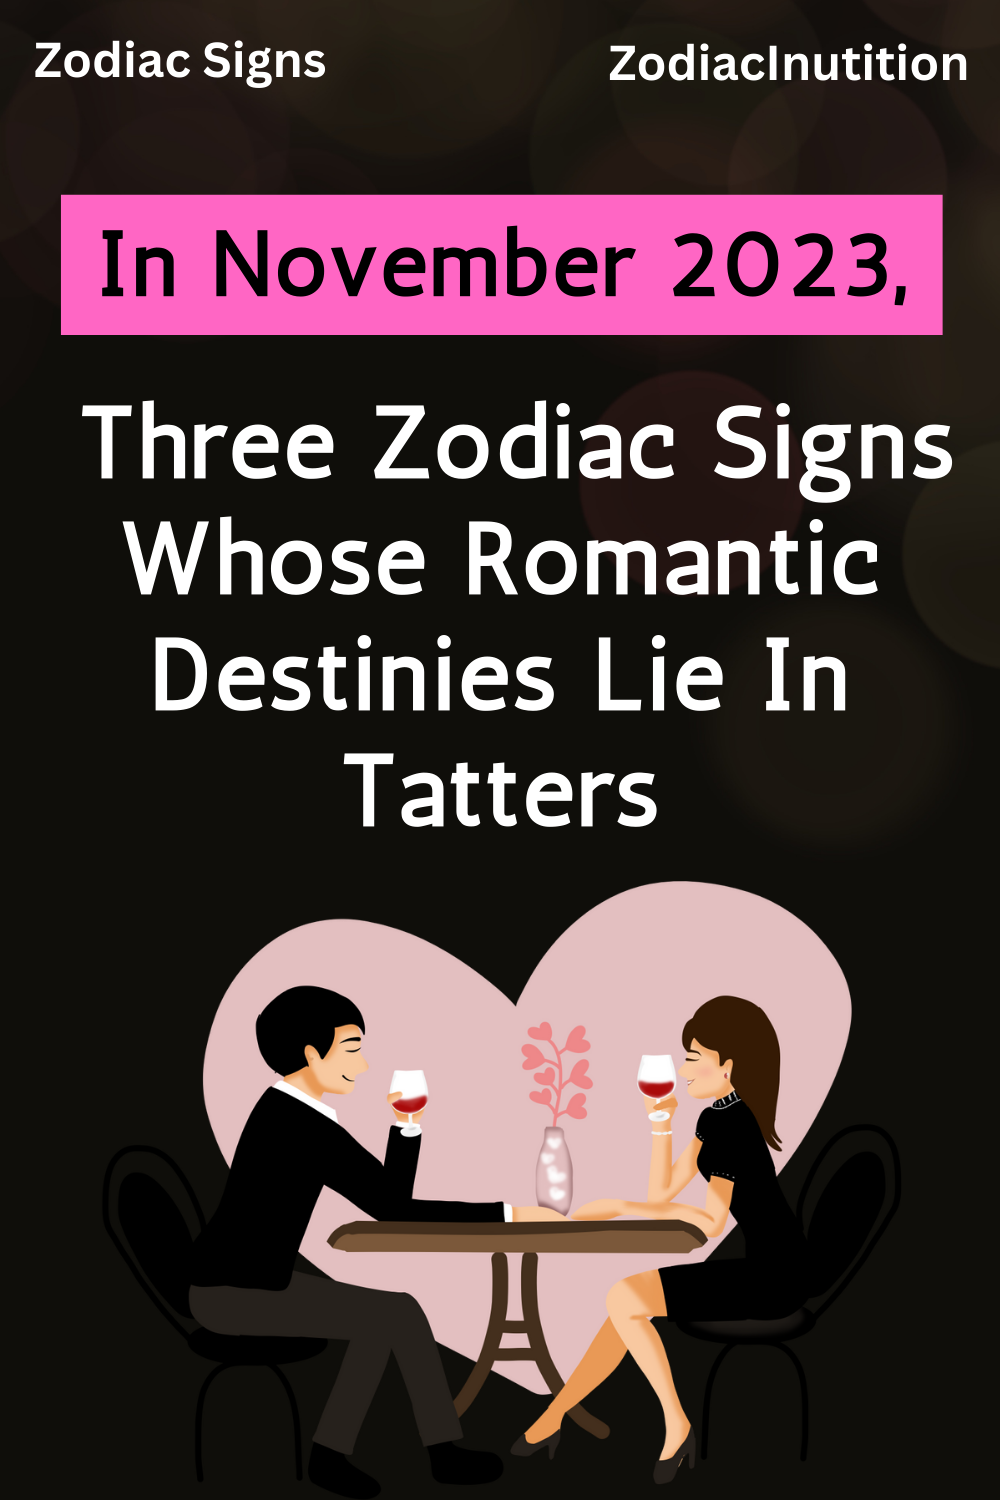 In November 2023, Three Zodiac Signs Whose Romantic Destinies Lie In Tatters